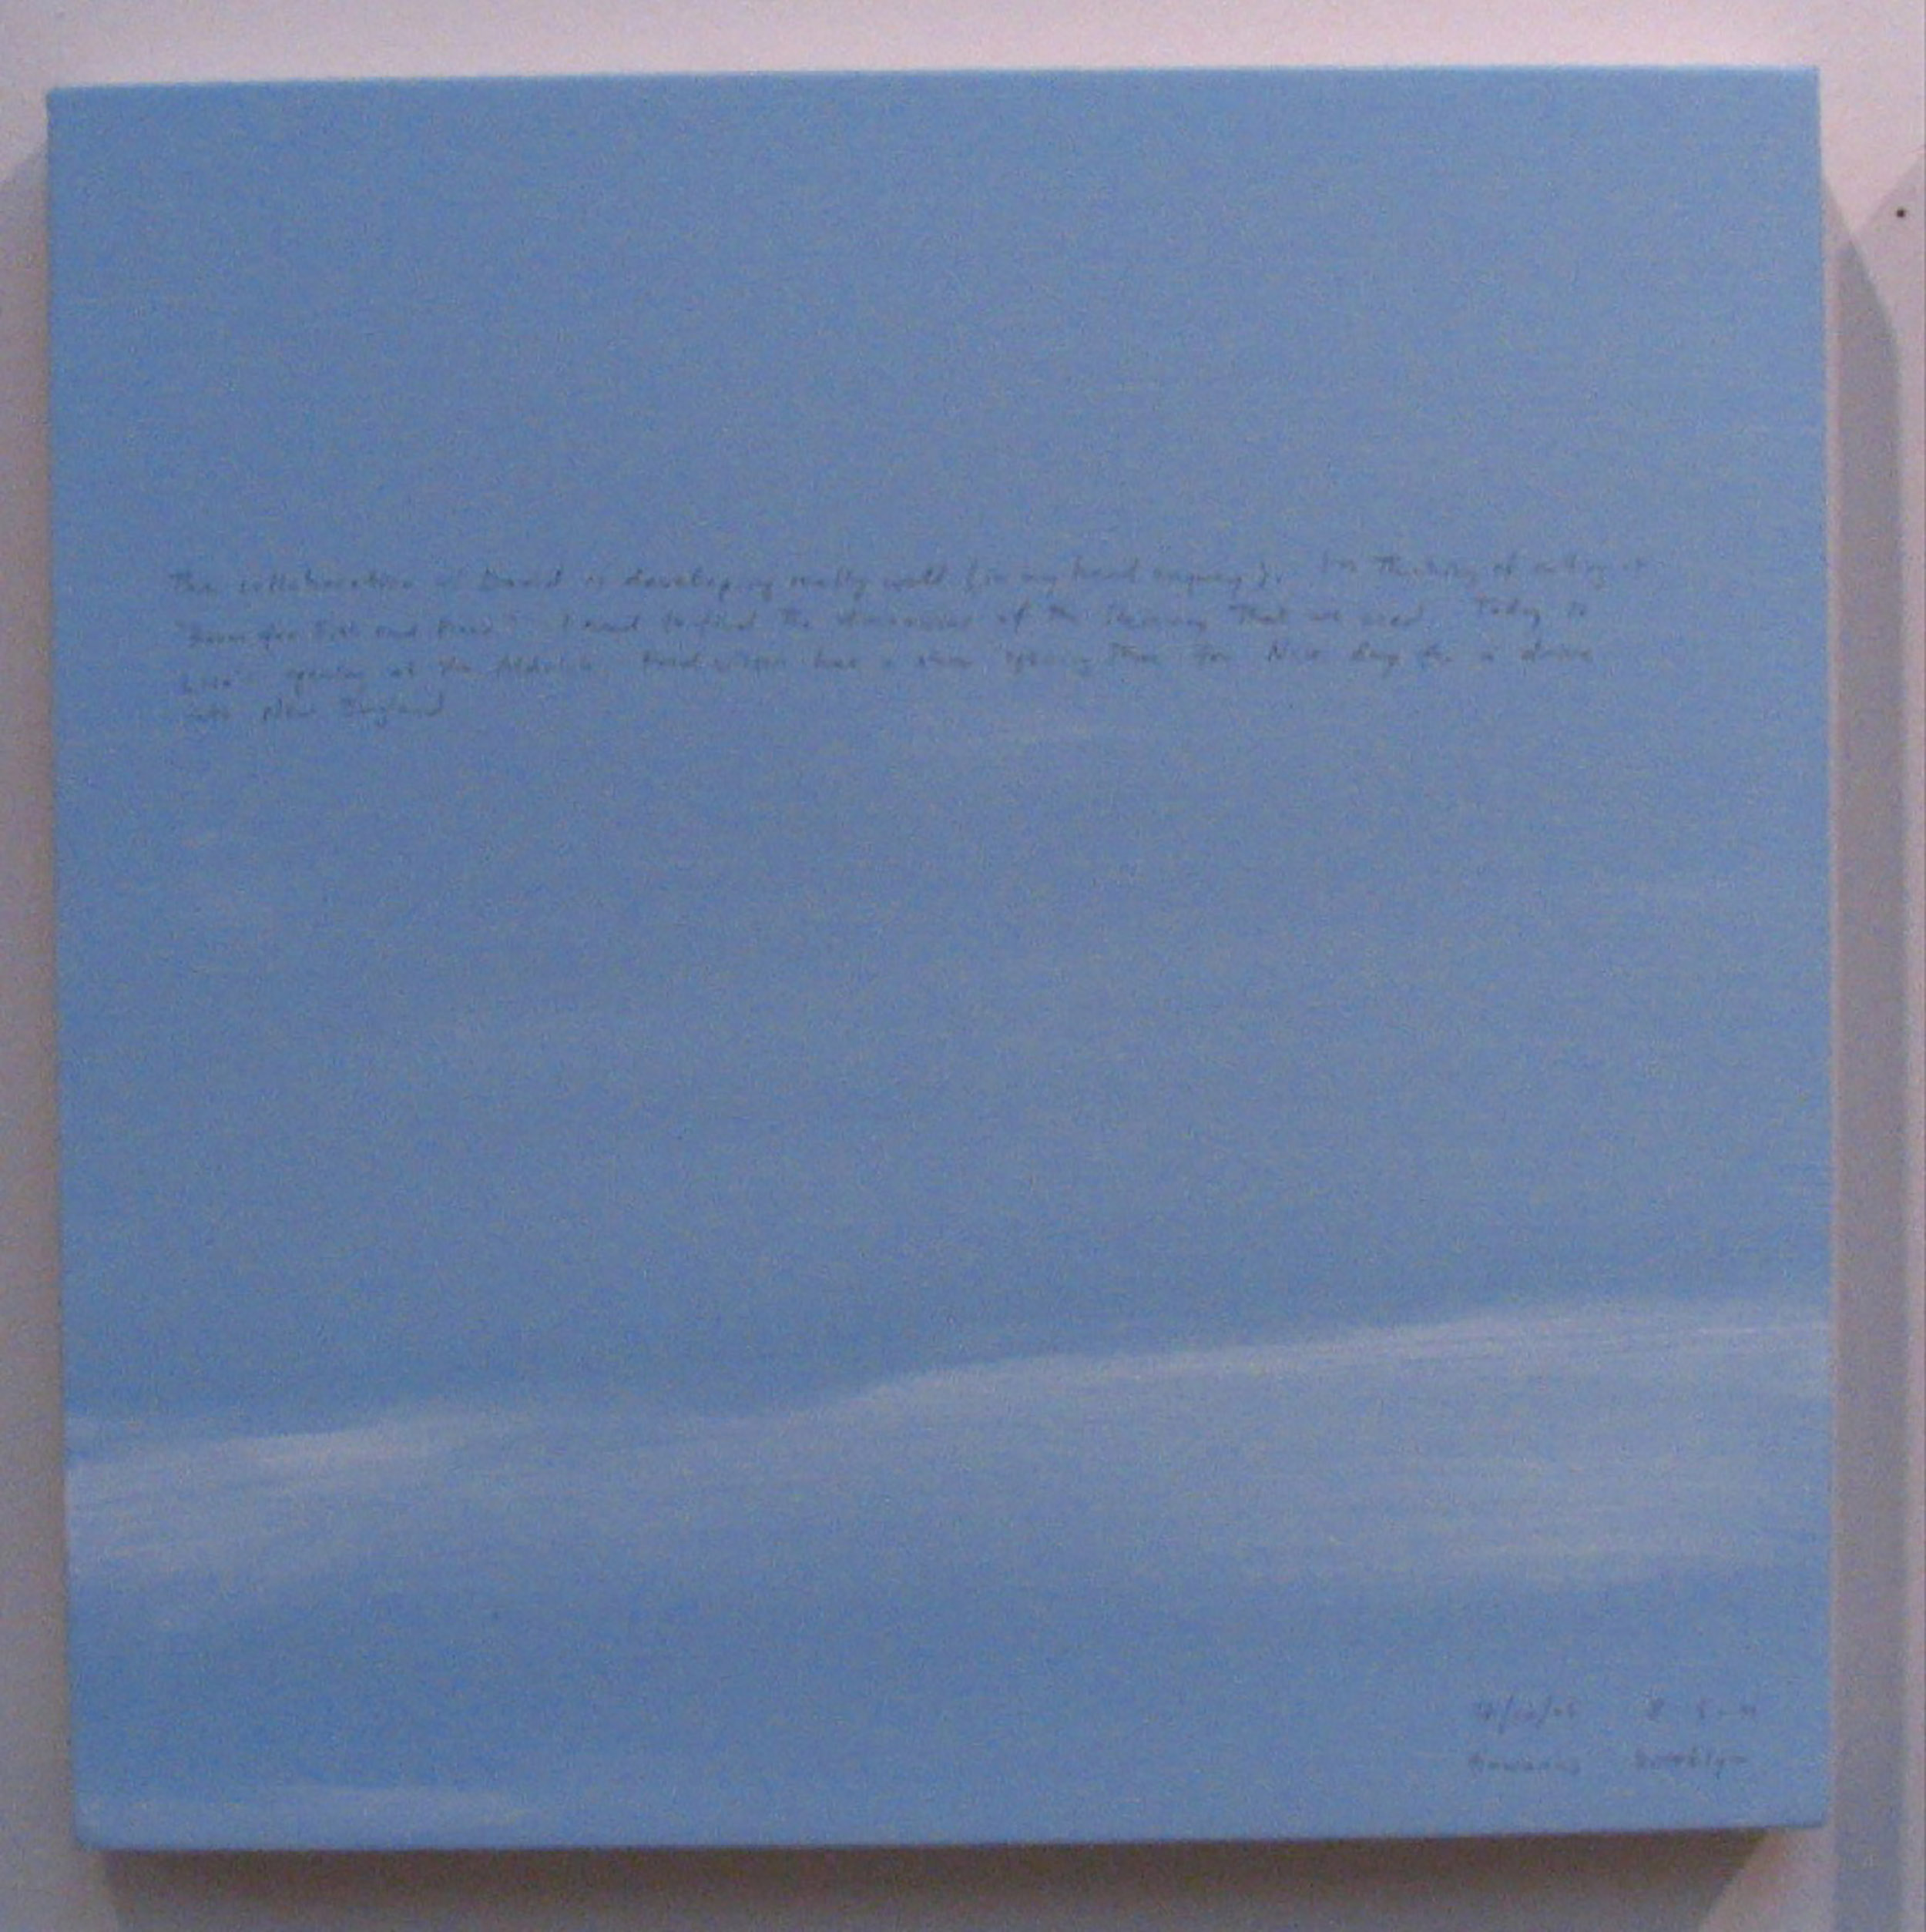 A 14 × 14 inch, acrylic painting of the sky. A journal entry is handwritten on the painting, but the photograph is too low-resolution to read.